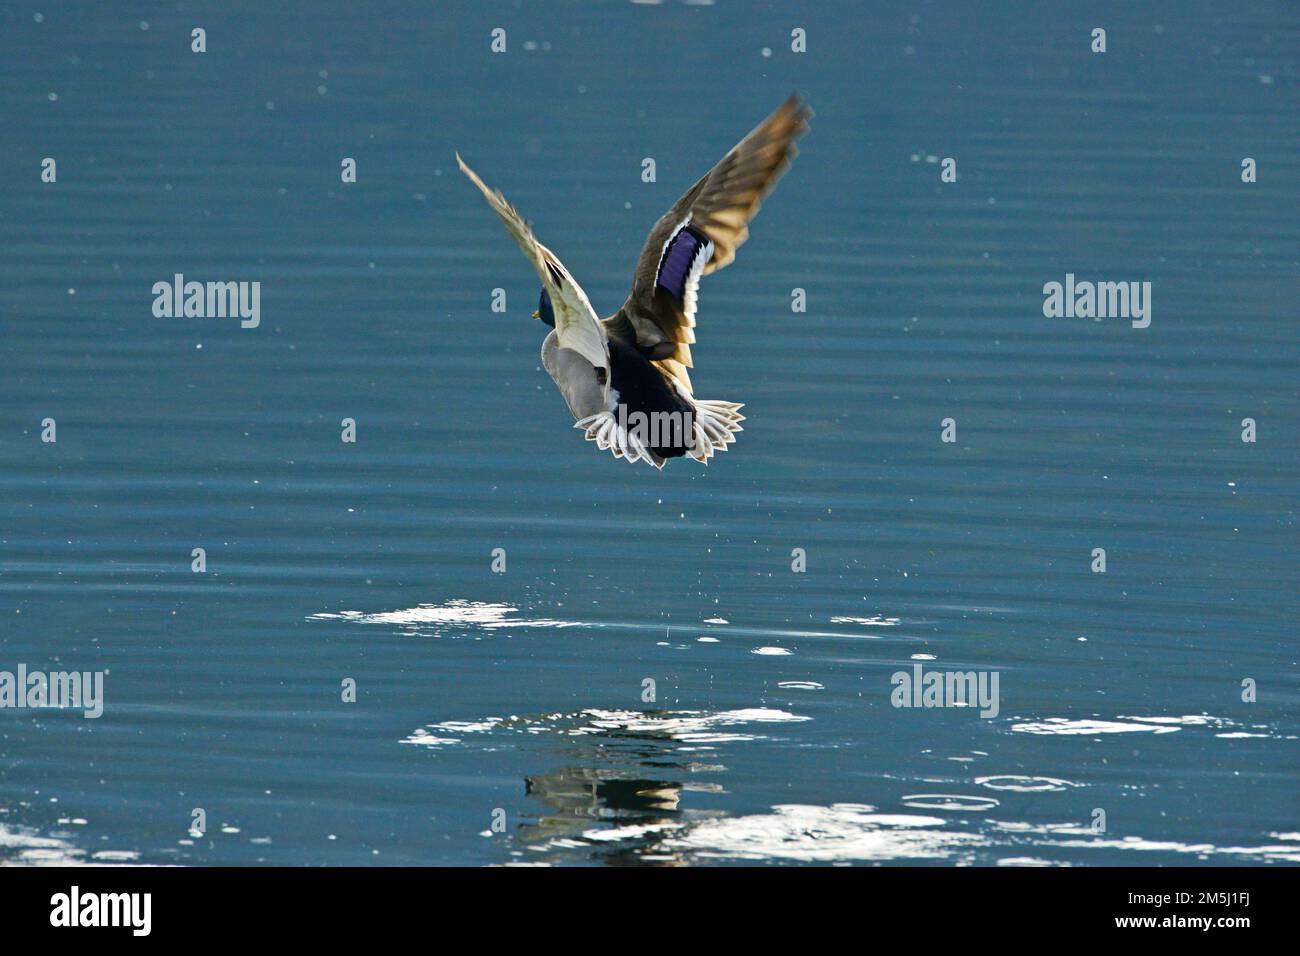 A mallard takes flight in the lake of Fimon, near Vicenza, Italy, March 18, 2022. Lake of Fimon is protected area and home to hundreds of plant and animal species. Studies show that spending time in nature can help build and maintain psychological resilience and readiness. Lake Fimon has formed at the end of third phase of the quaternary ice age and has undergone major changes arriving at its actual form. ( U.S. Army Photos by Paolo Bovo) Stock Photo